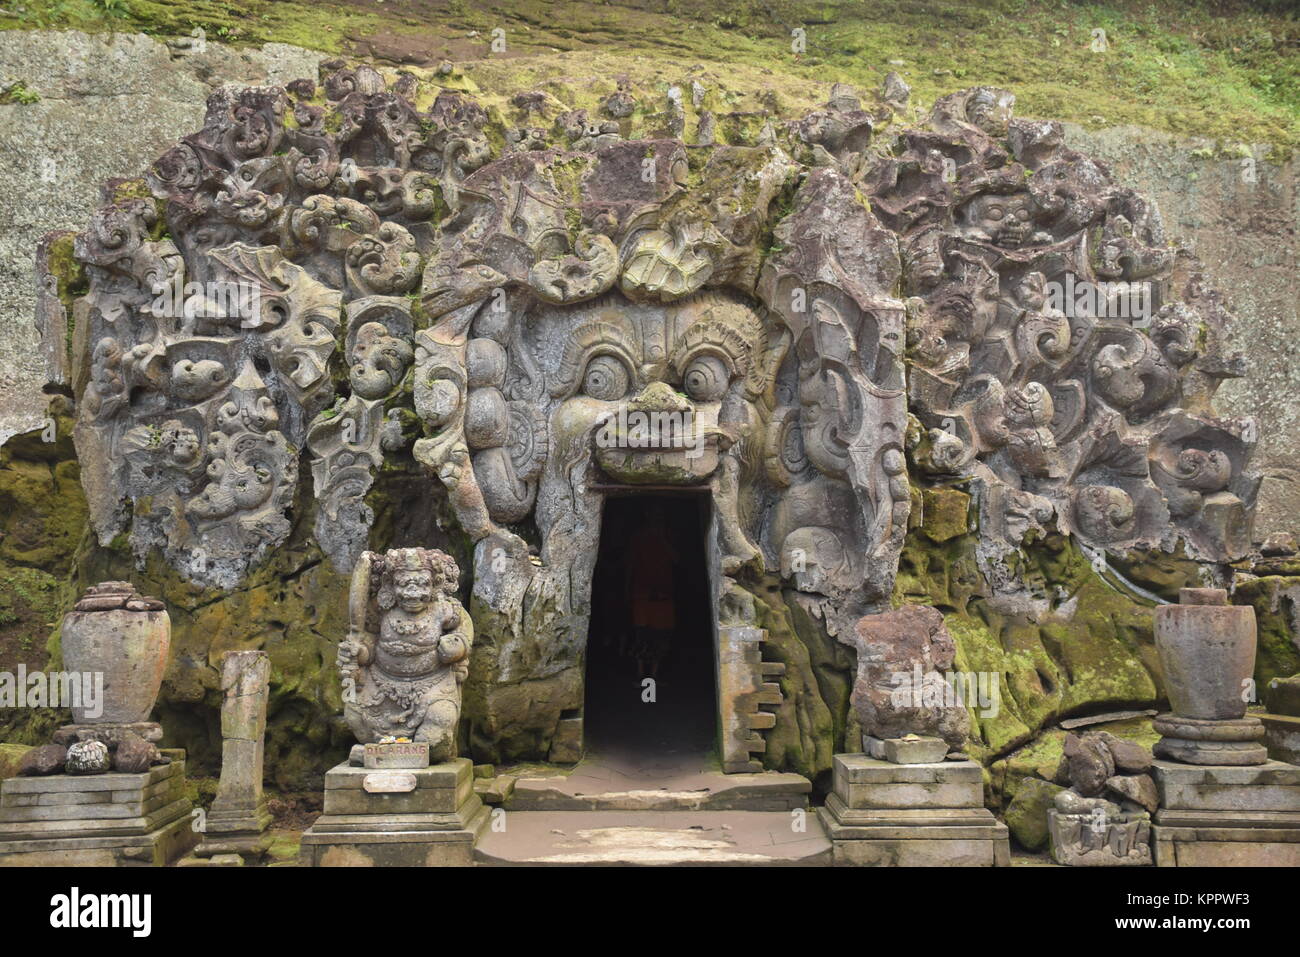 The entrance of Goa Gajah sanctuary (also called Elephant cave) with various menacing creatures and demons carved into the rock in Bali - Indonesia Stock Photo